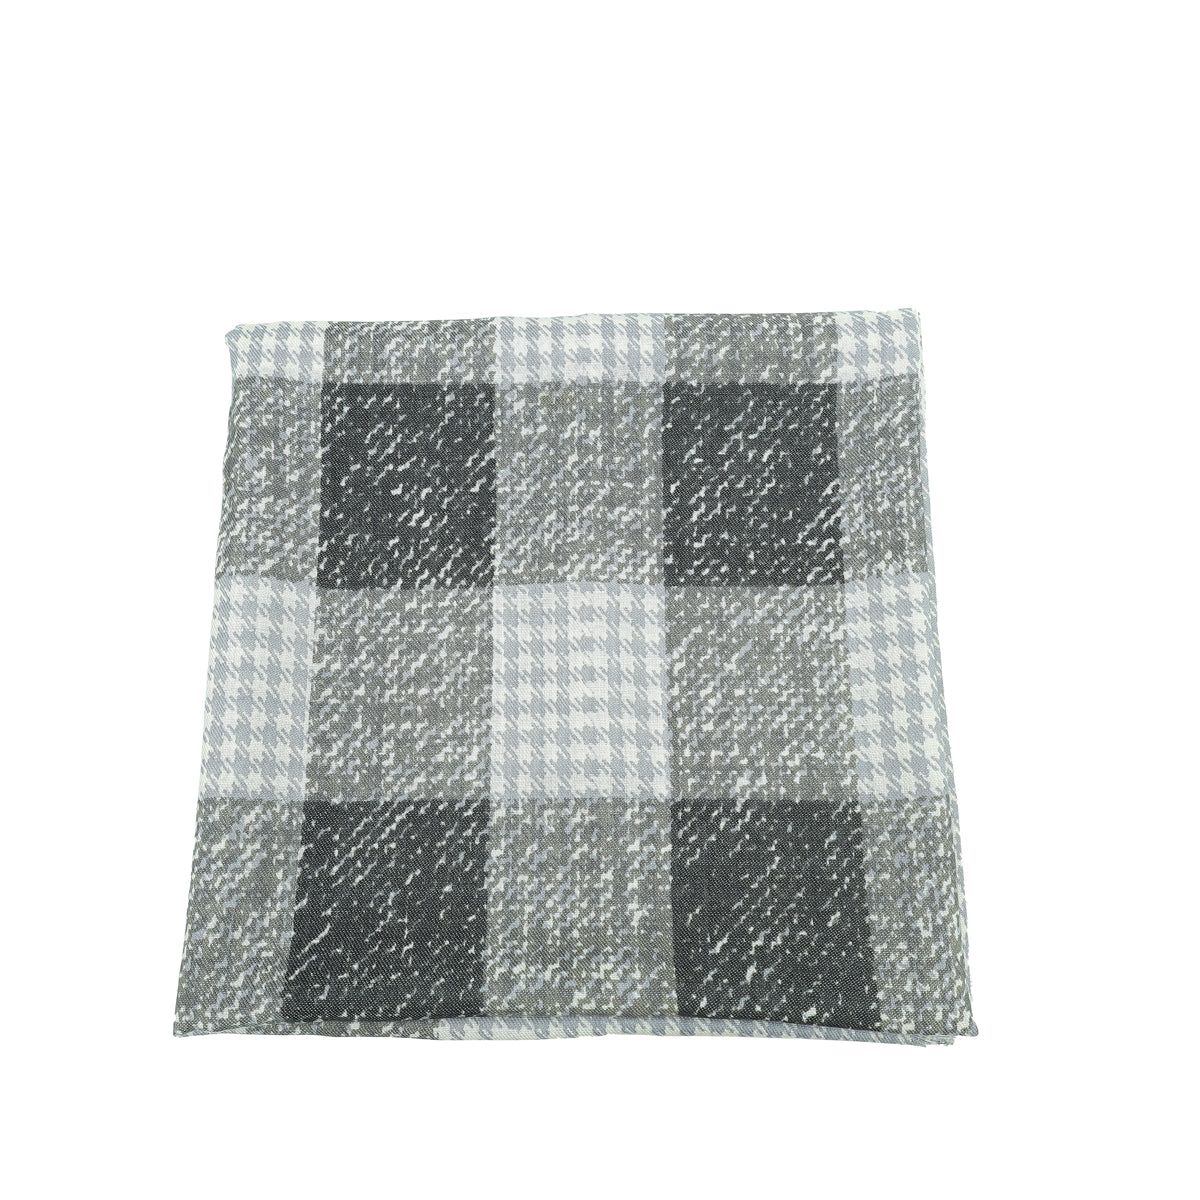 Burberry Gray Houndstooth Check Print Fringe Scarf